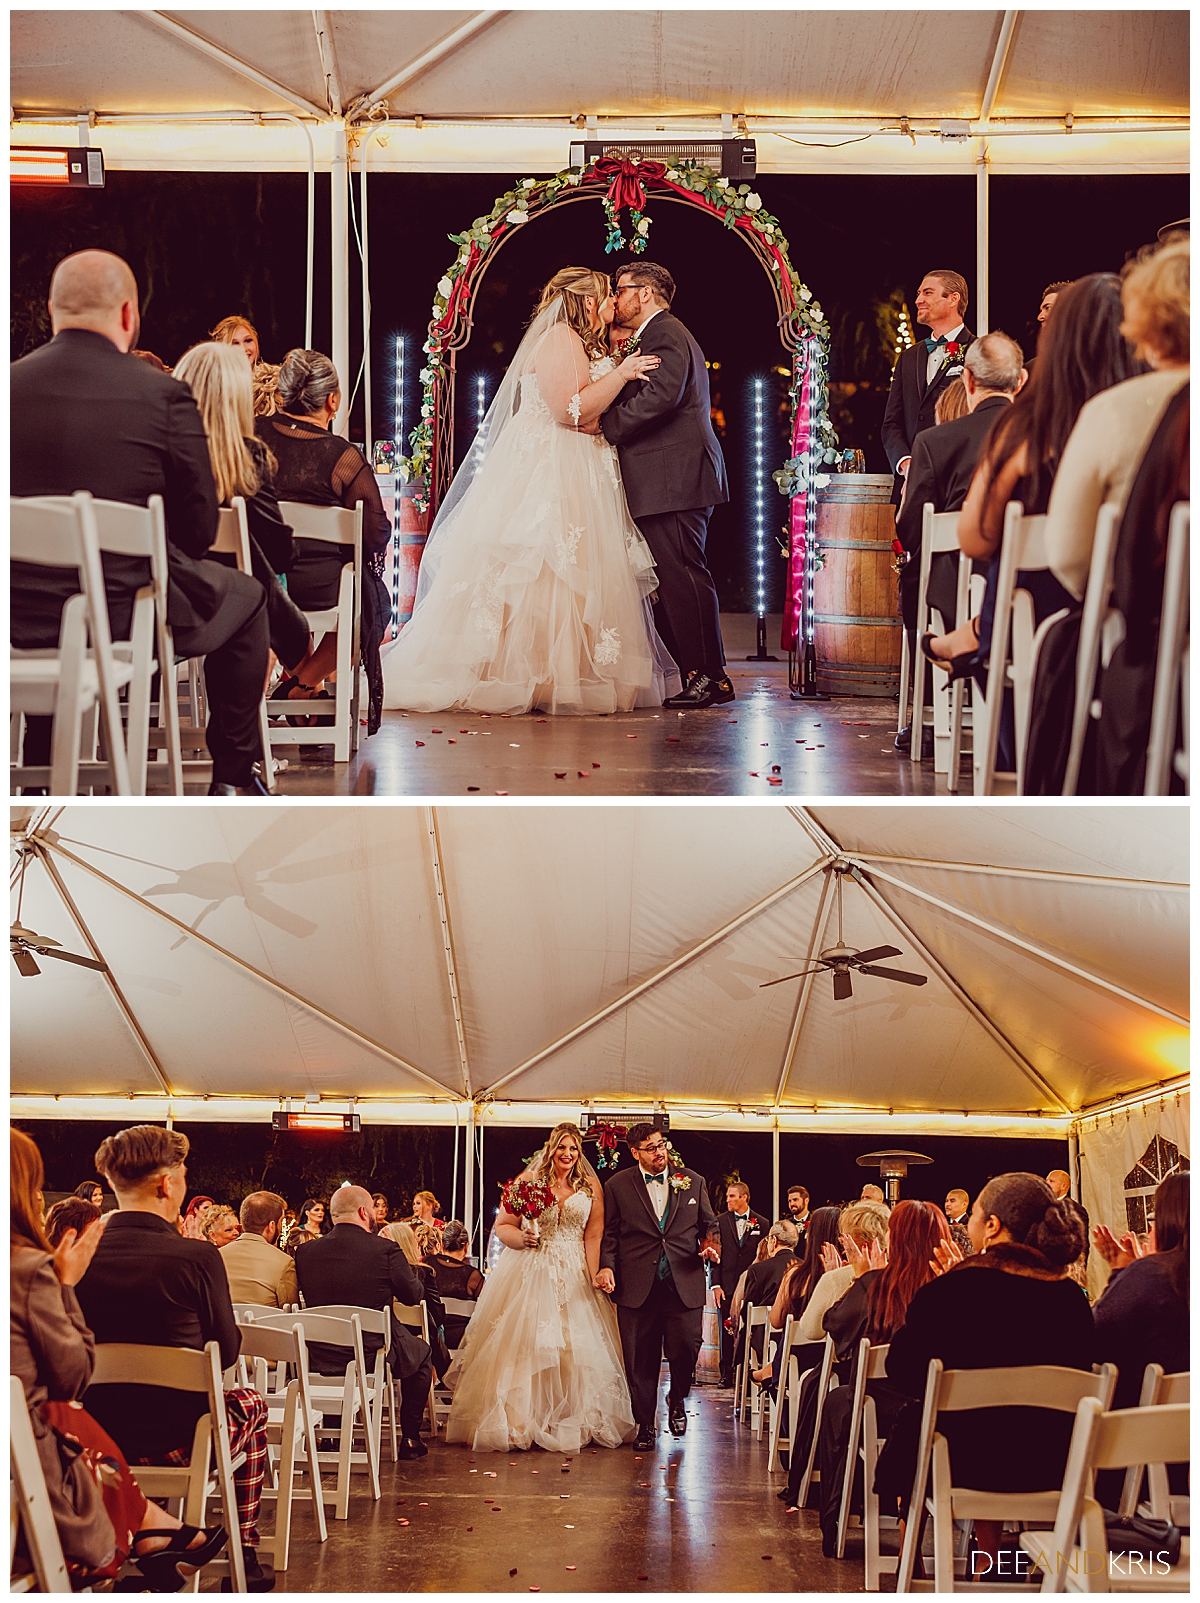 Two images: Toop image of bride and groom's first kiss. Bottom image of bride and groom's recessional.